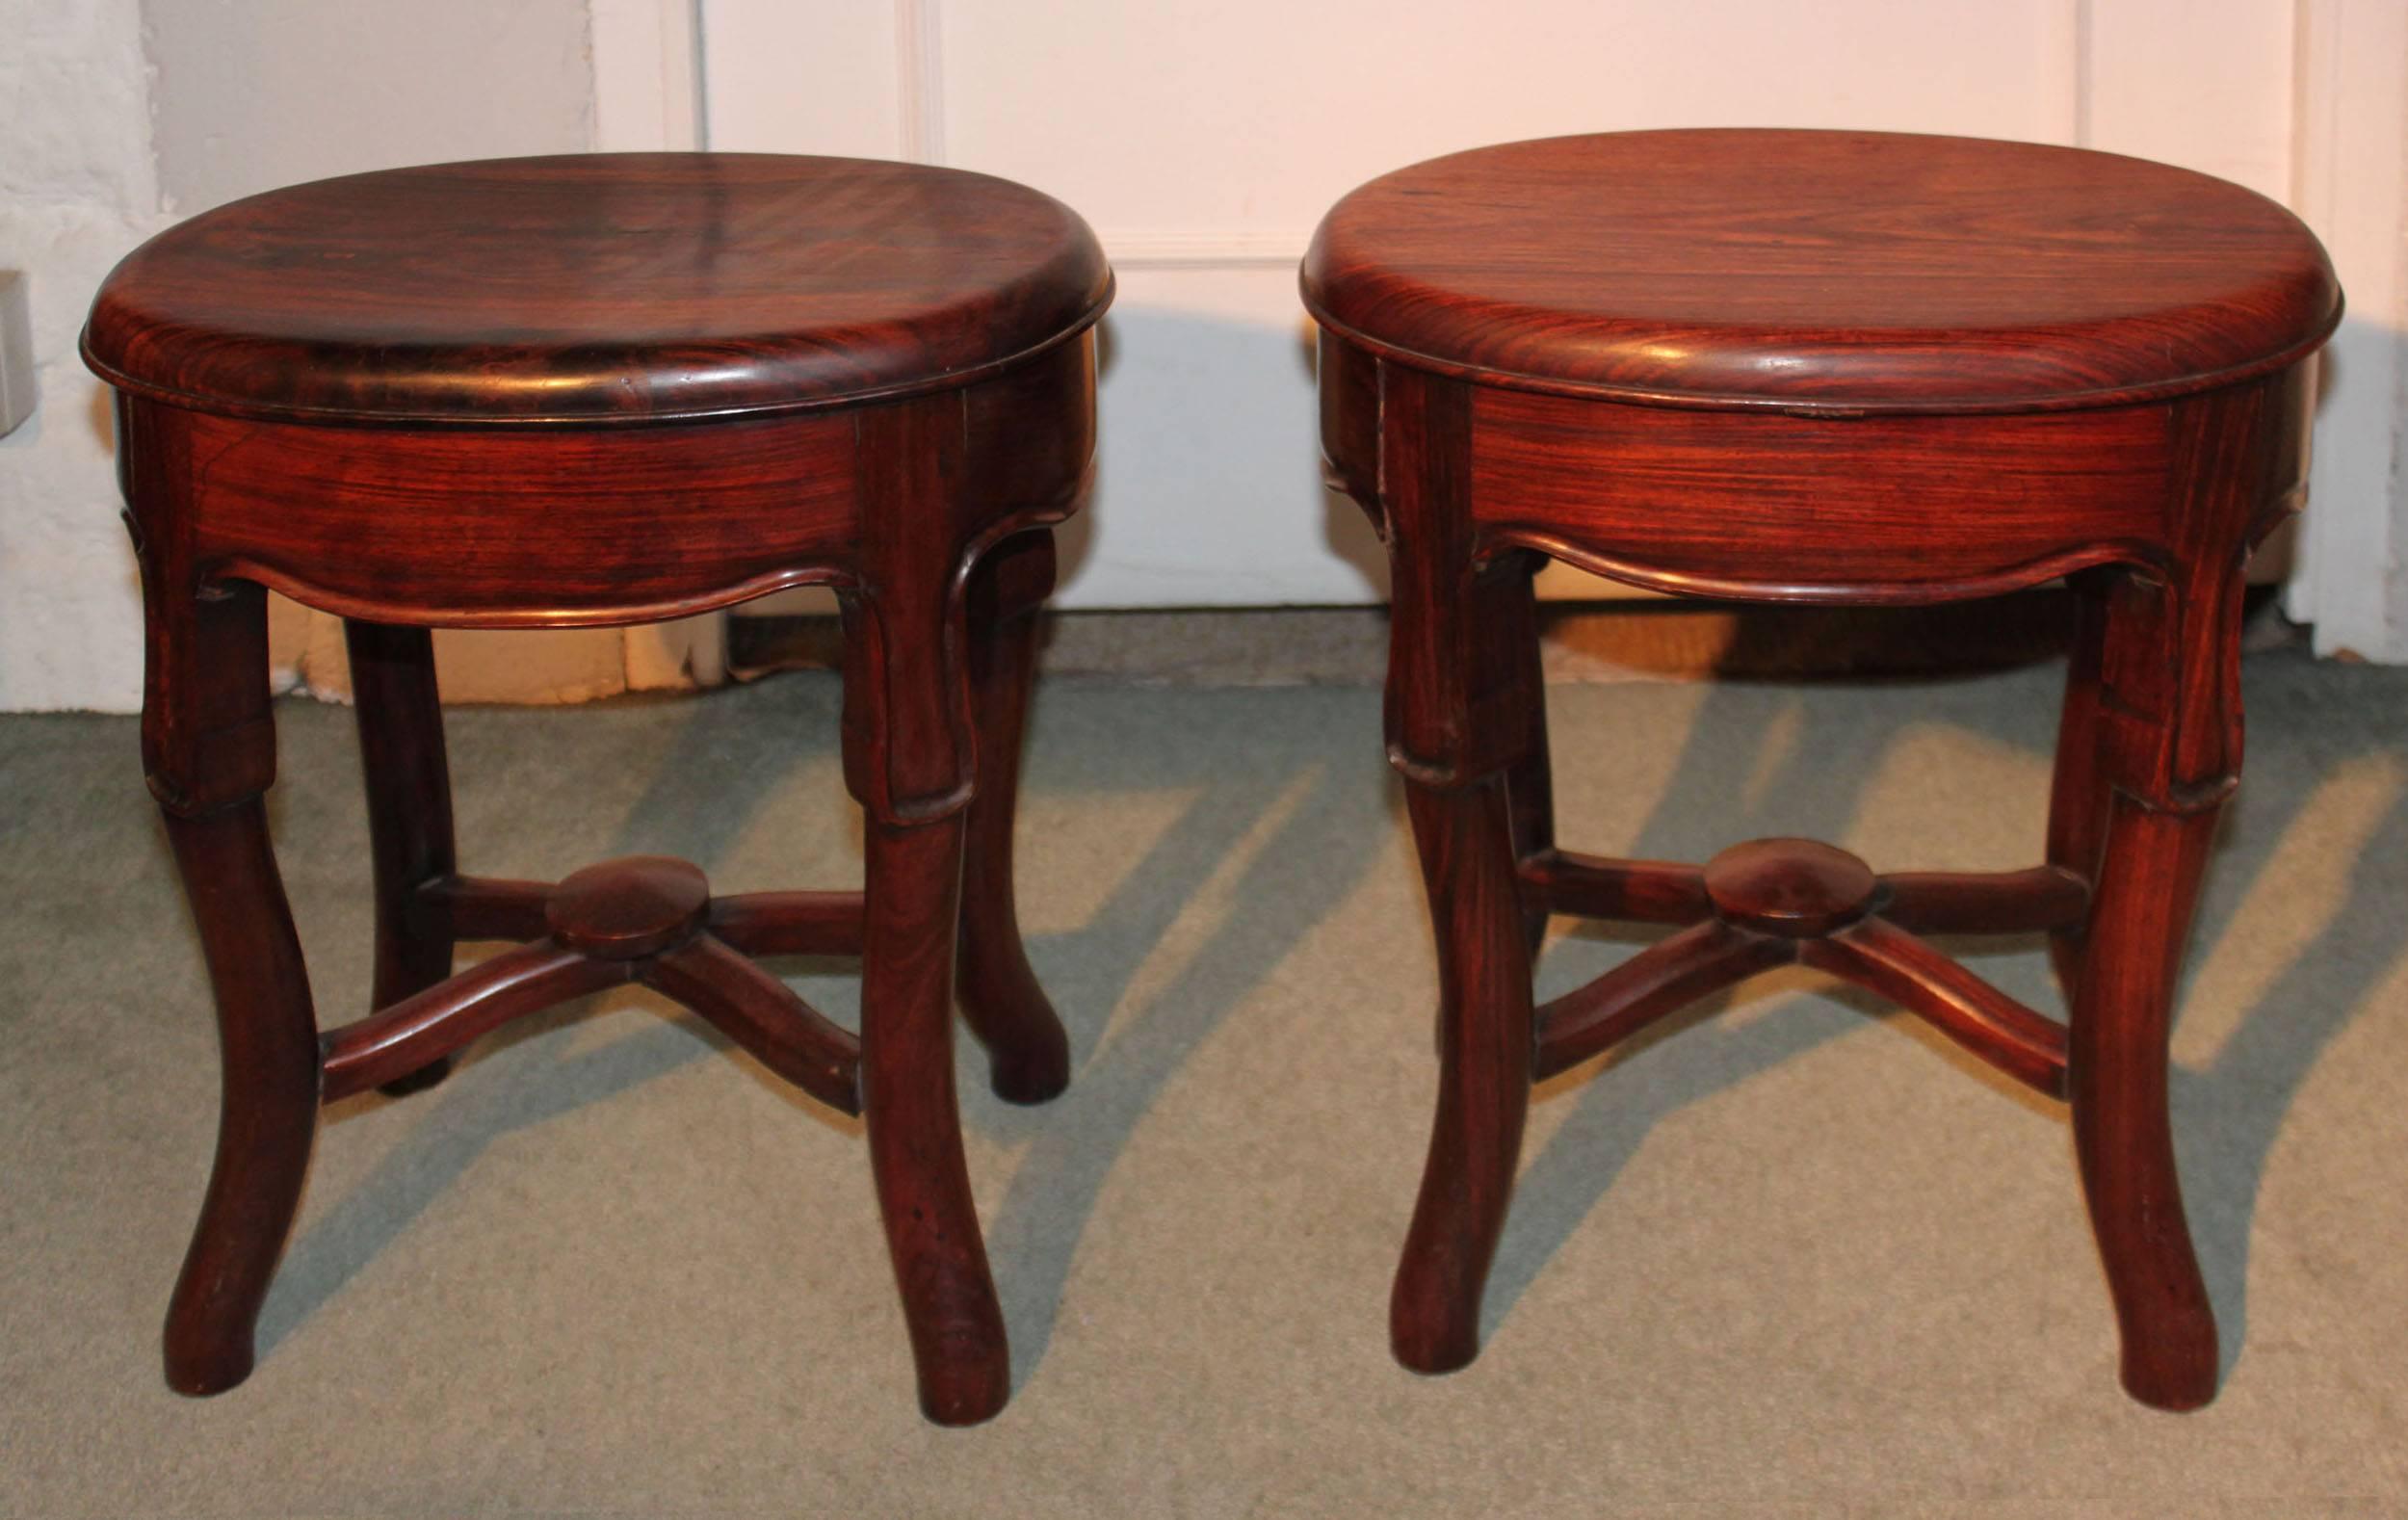 A pair of late 19th century Chinese stools in huang huali wood which is similar to padouk.

 